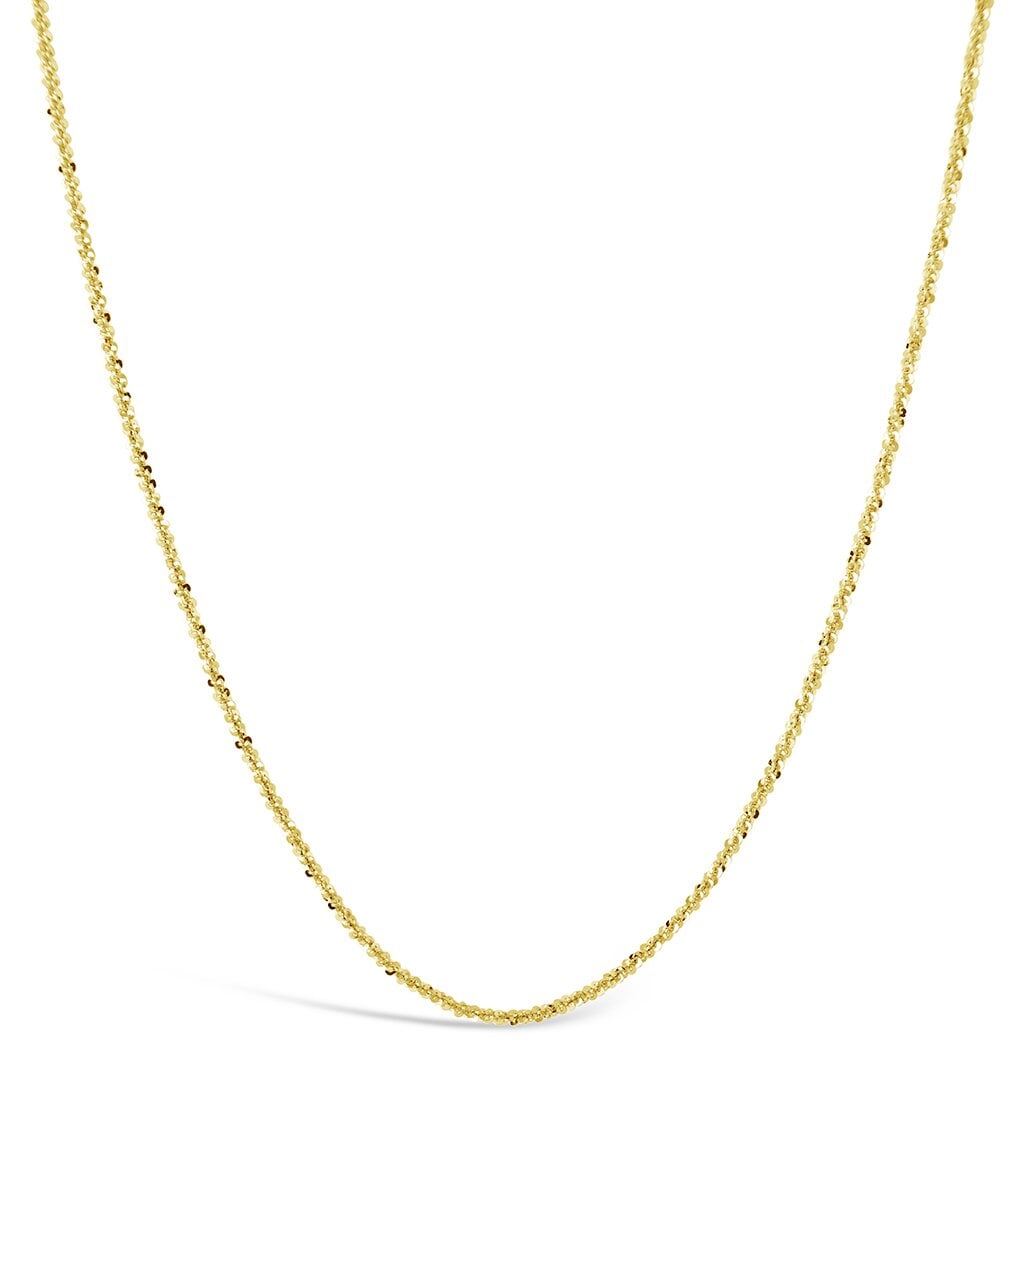 Men's Sterling Silver Rolo Chain Necklace Accessories Sterling Forever Gold 16" 